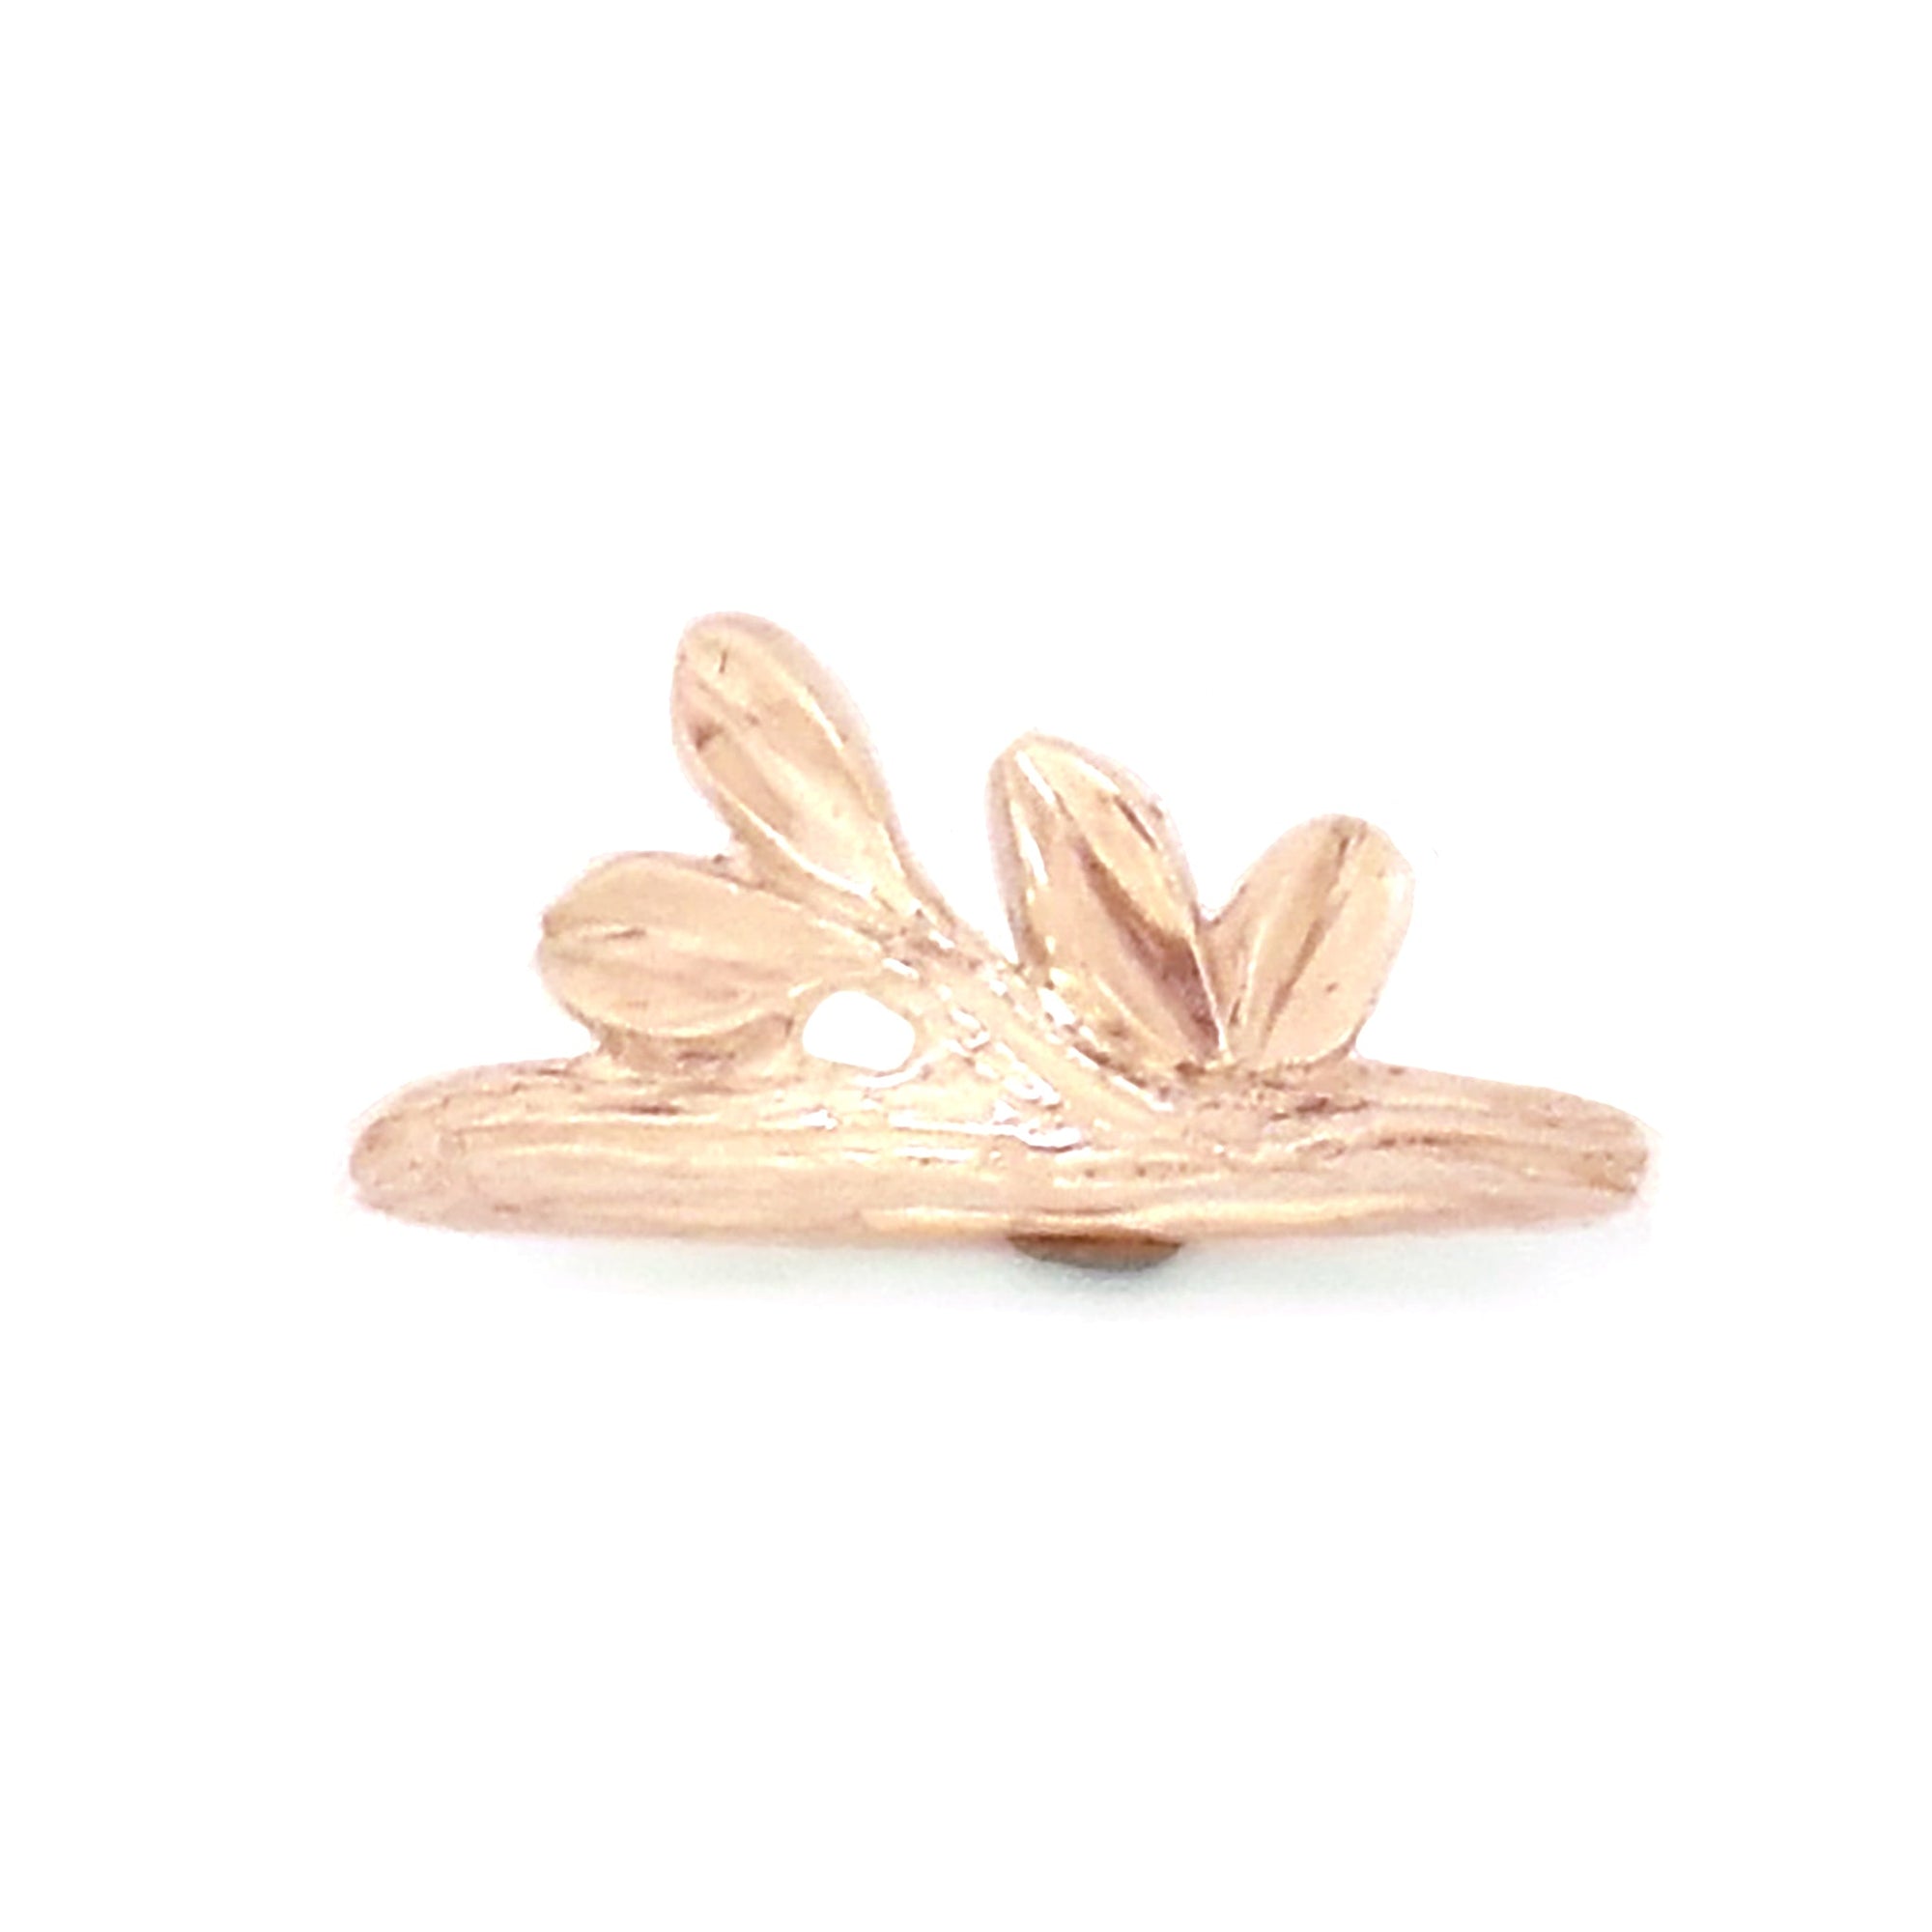 Gold Growing Love Twig Ring - your choice of gold - Wedding Ring  18K Palladium White Gold  14K Rose Gold 6353 - handmade by Beth Millner Jewelry